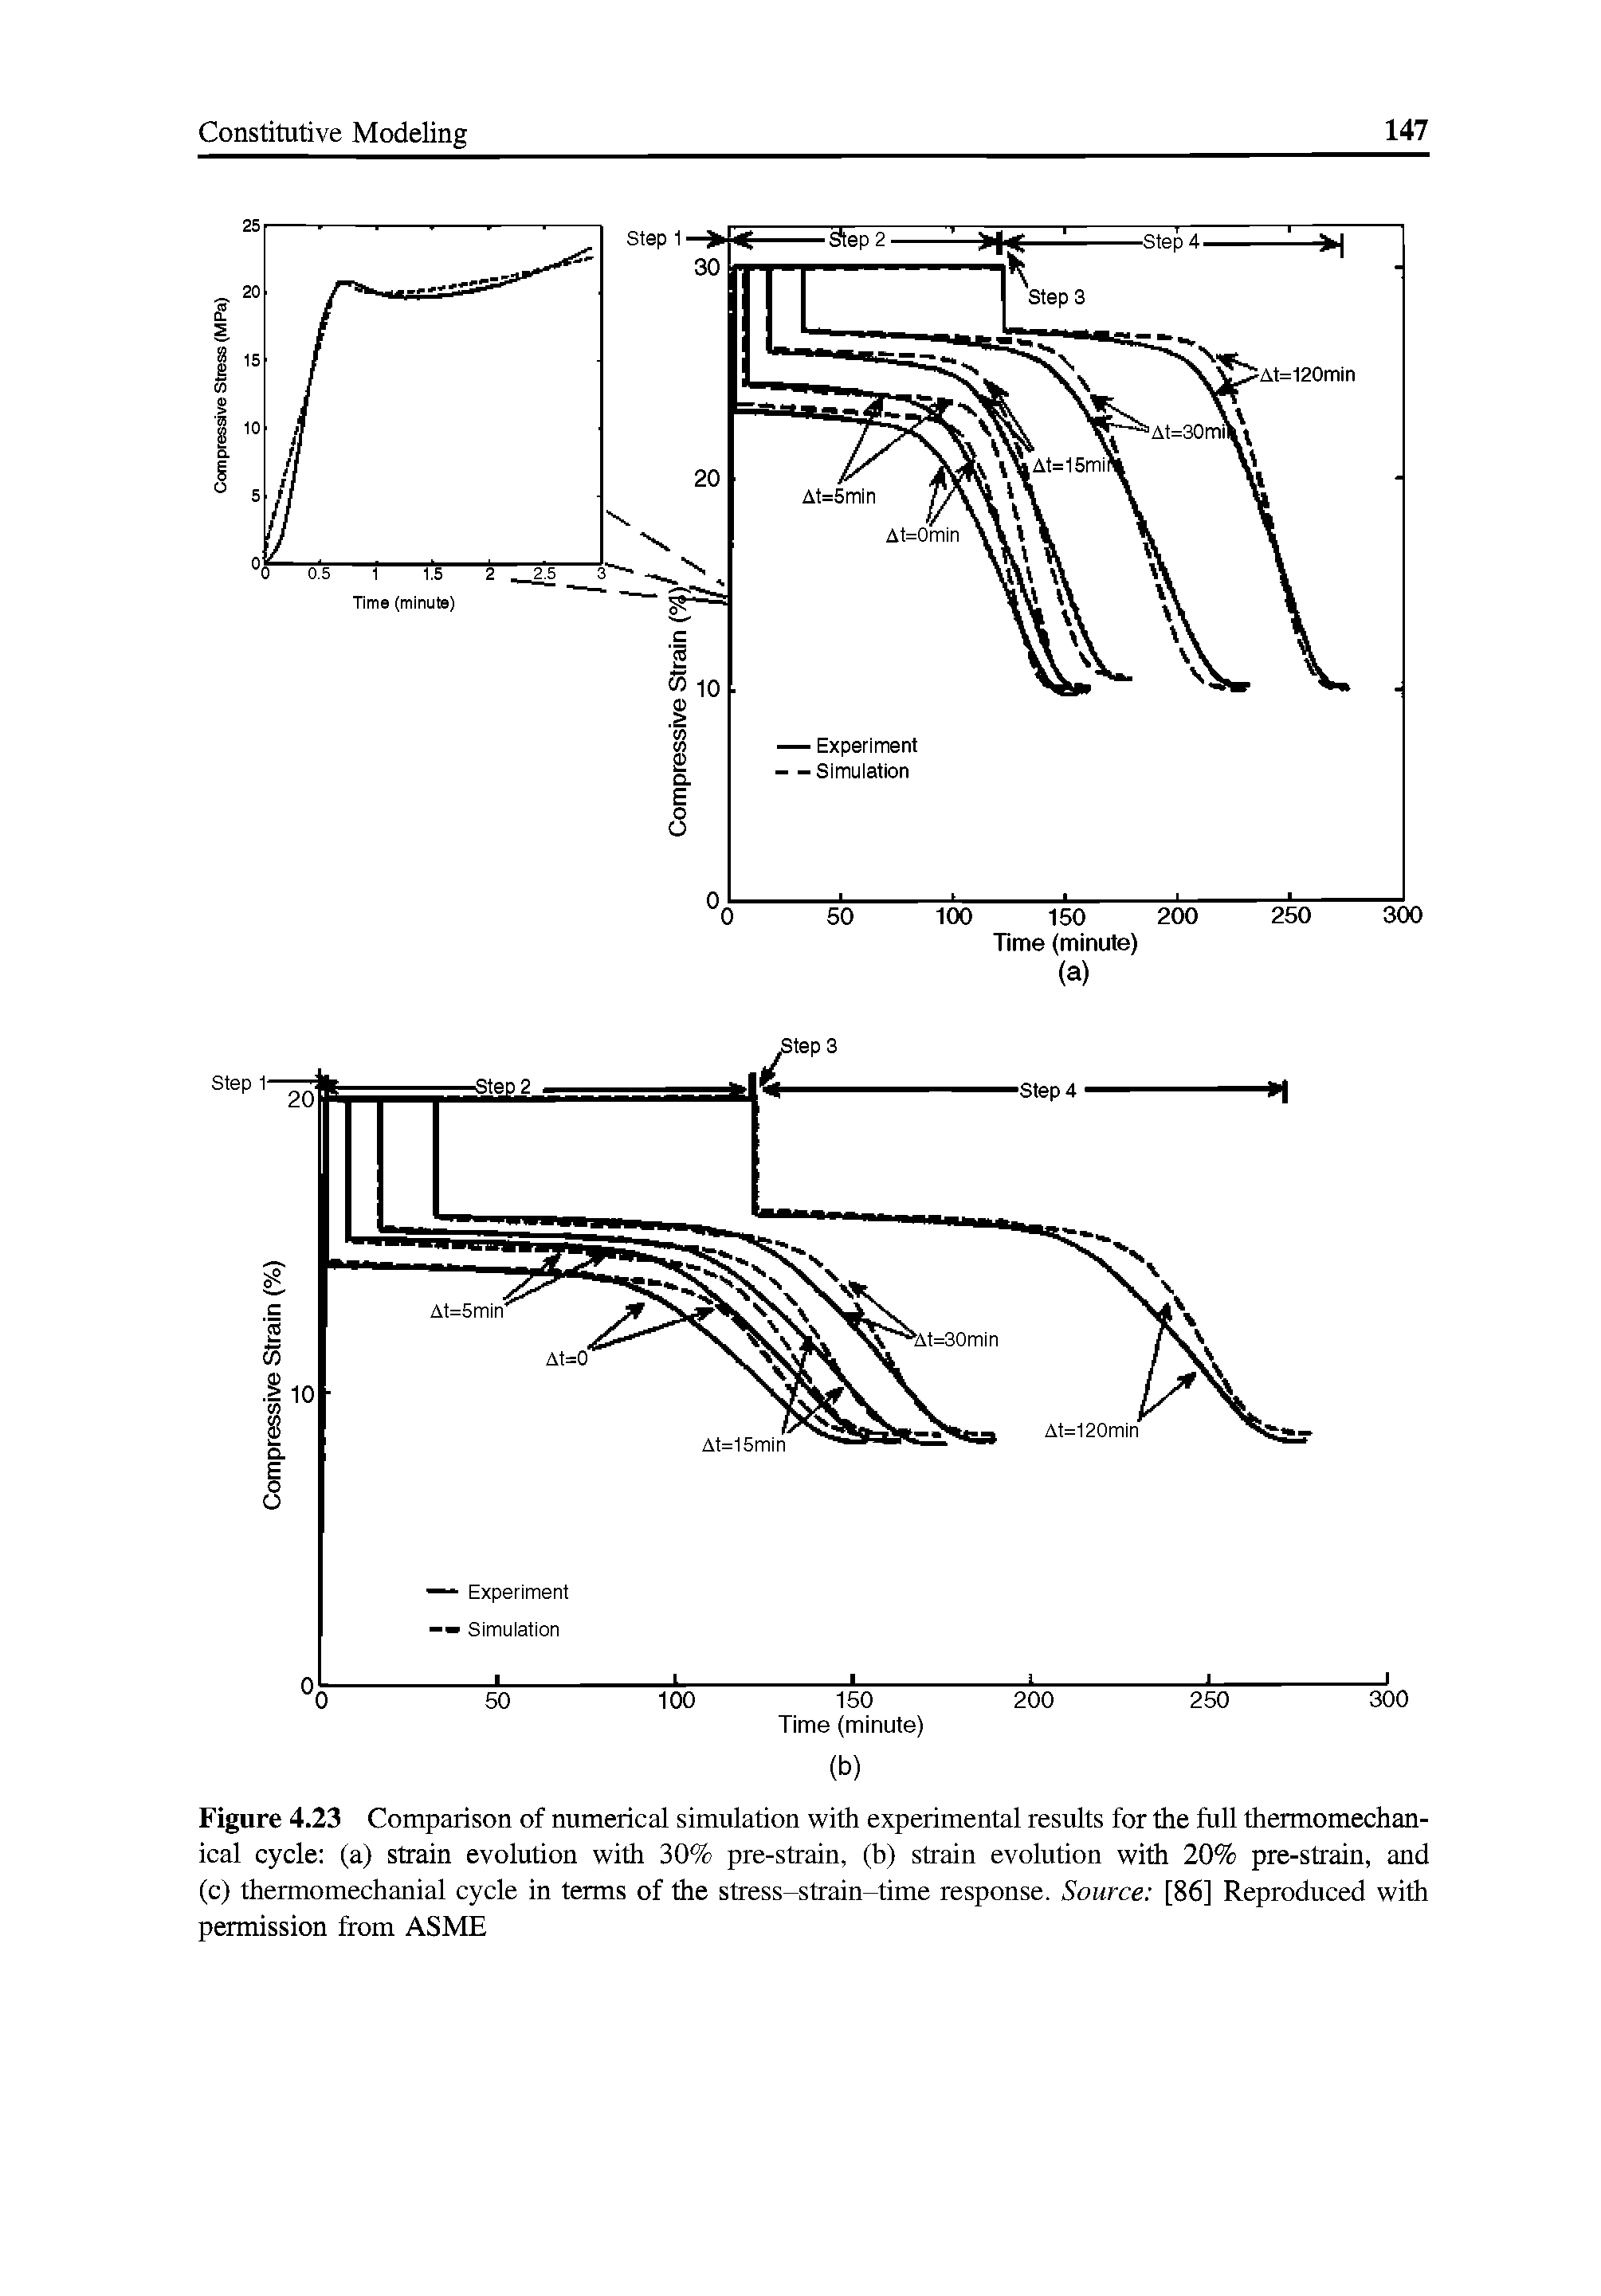 Figure 4.23 Comparison of numerical simulation with experimental results for the full thermomechanical cycle (a) strain evolution with 30% pre-strain, (b) strain evolution with 20% pre-strain, and (c) thermomechanial cycle in terms of the stress-strain-time response. Source [86] Reproduced with permission from ASME...